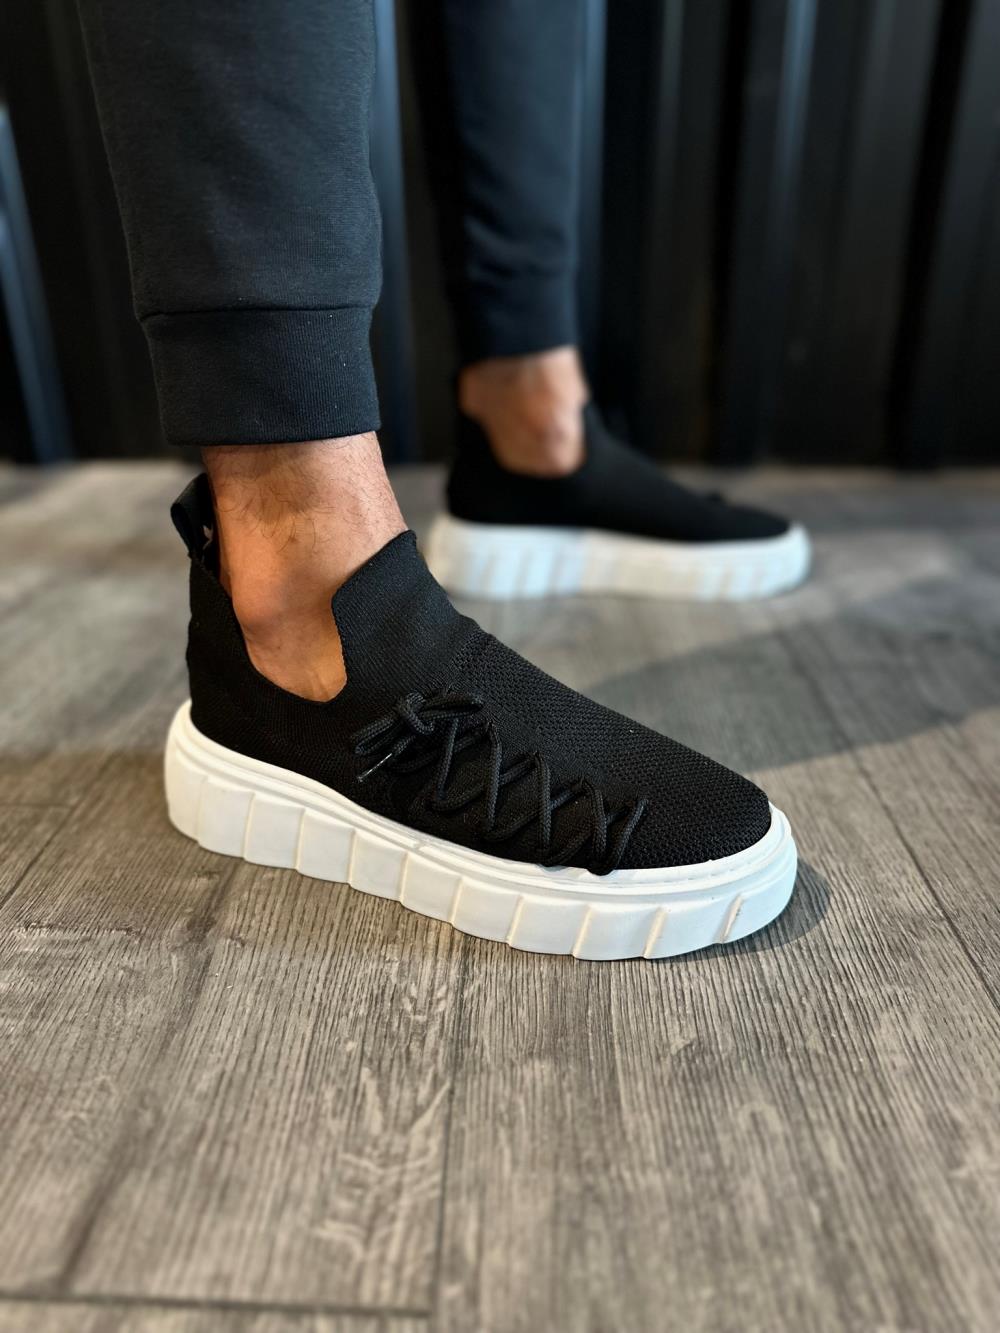 Men's High Sole Casual Suede Sneakers Shoes 1025 Black (White Sole) - STREETMODE™